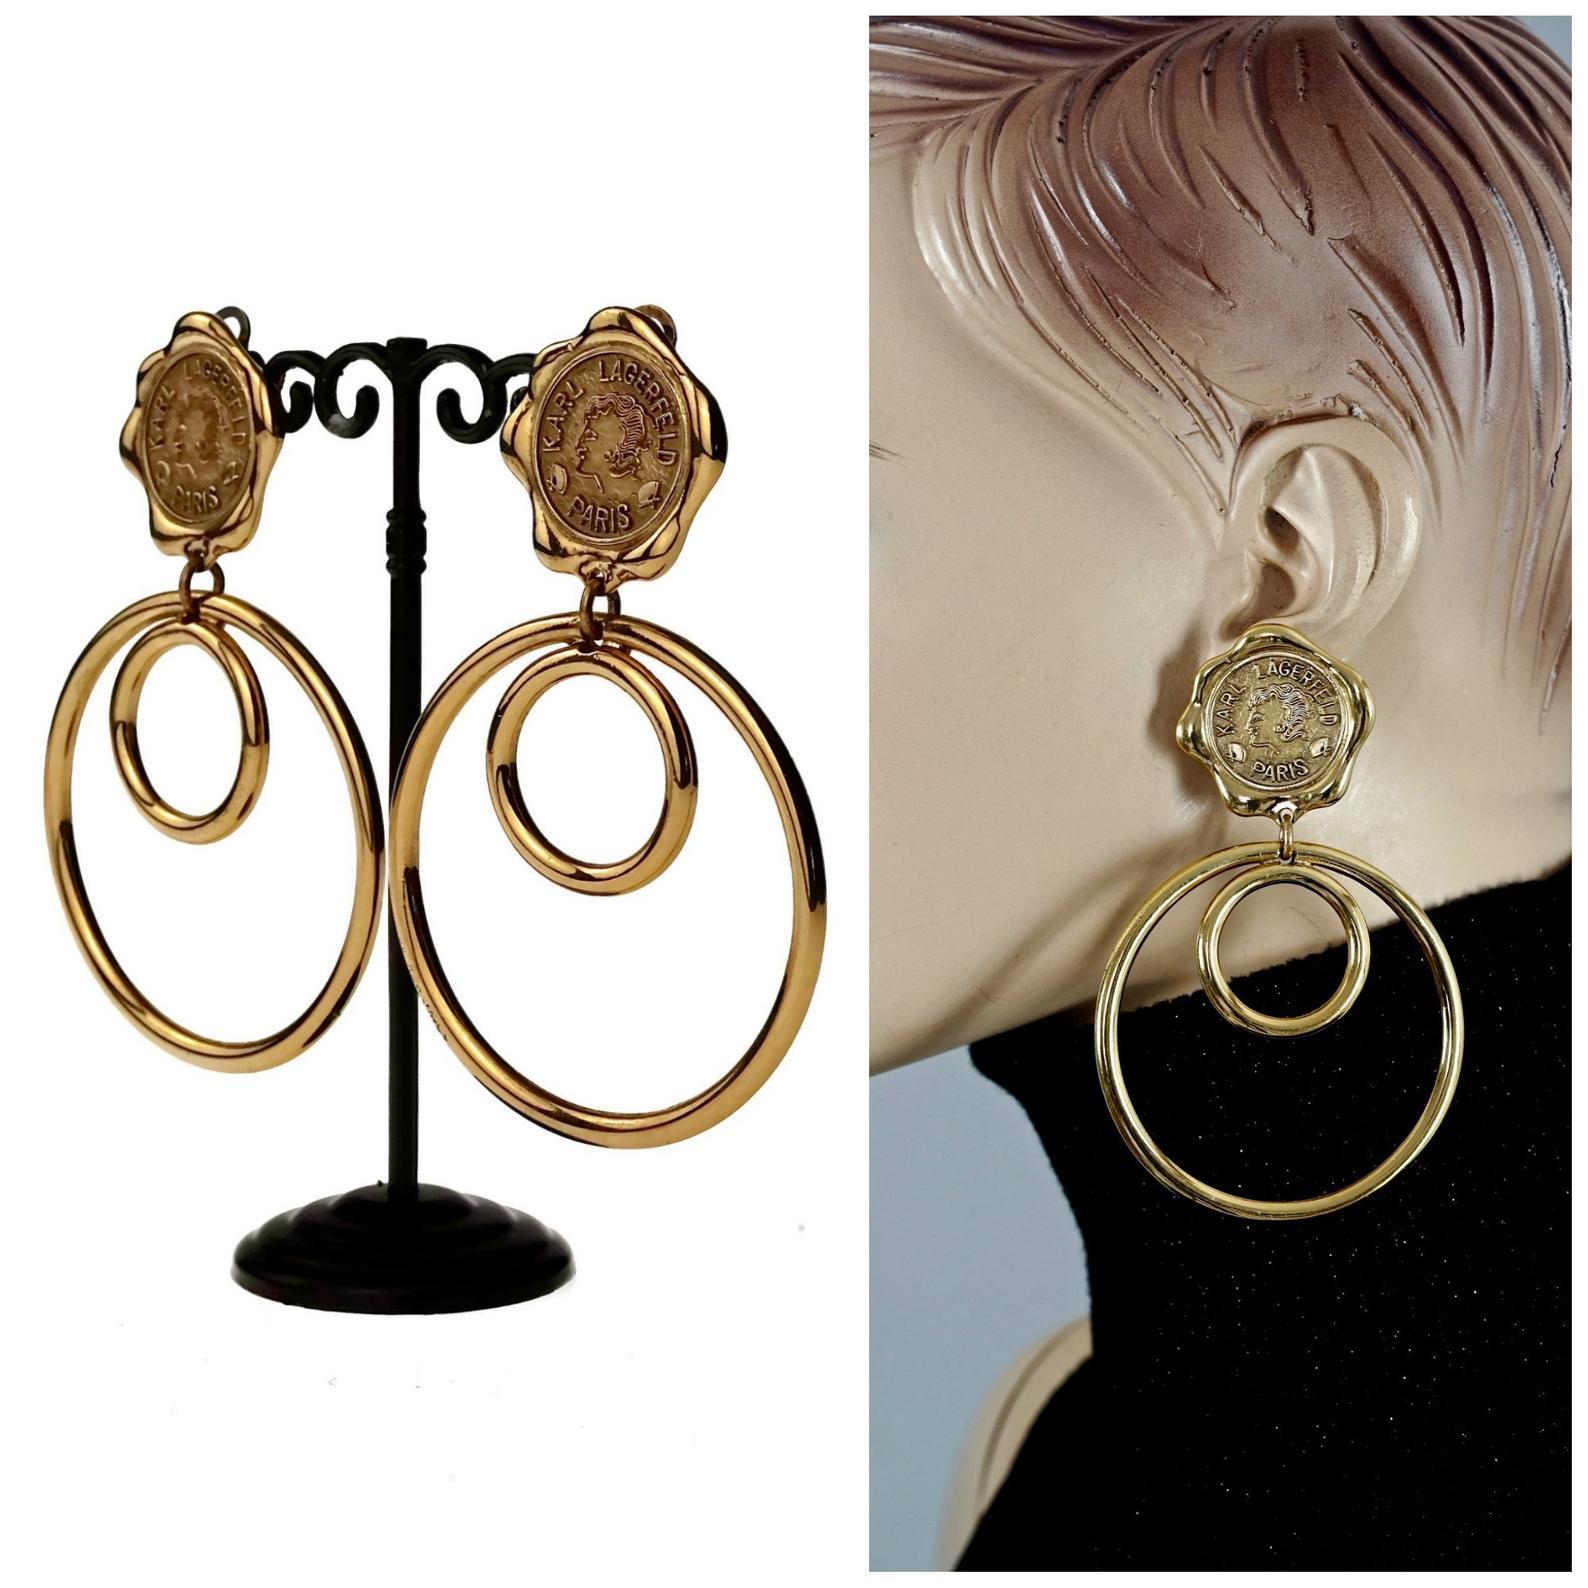 Vintage Massive KARL LAGERFELD Profile Wax Seal Double Hoop Earrings

Measurements:
Height: 3.93 inches (10 cm)
Width: 2.52 inches (6.4 cm)
Weight per Earring: 38 grams

Features:
- 100% Authentic KARL LAGERFELD.
- Lagerfeld wax seal profile with